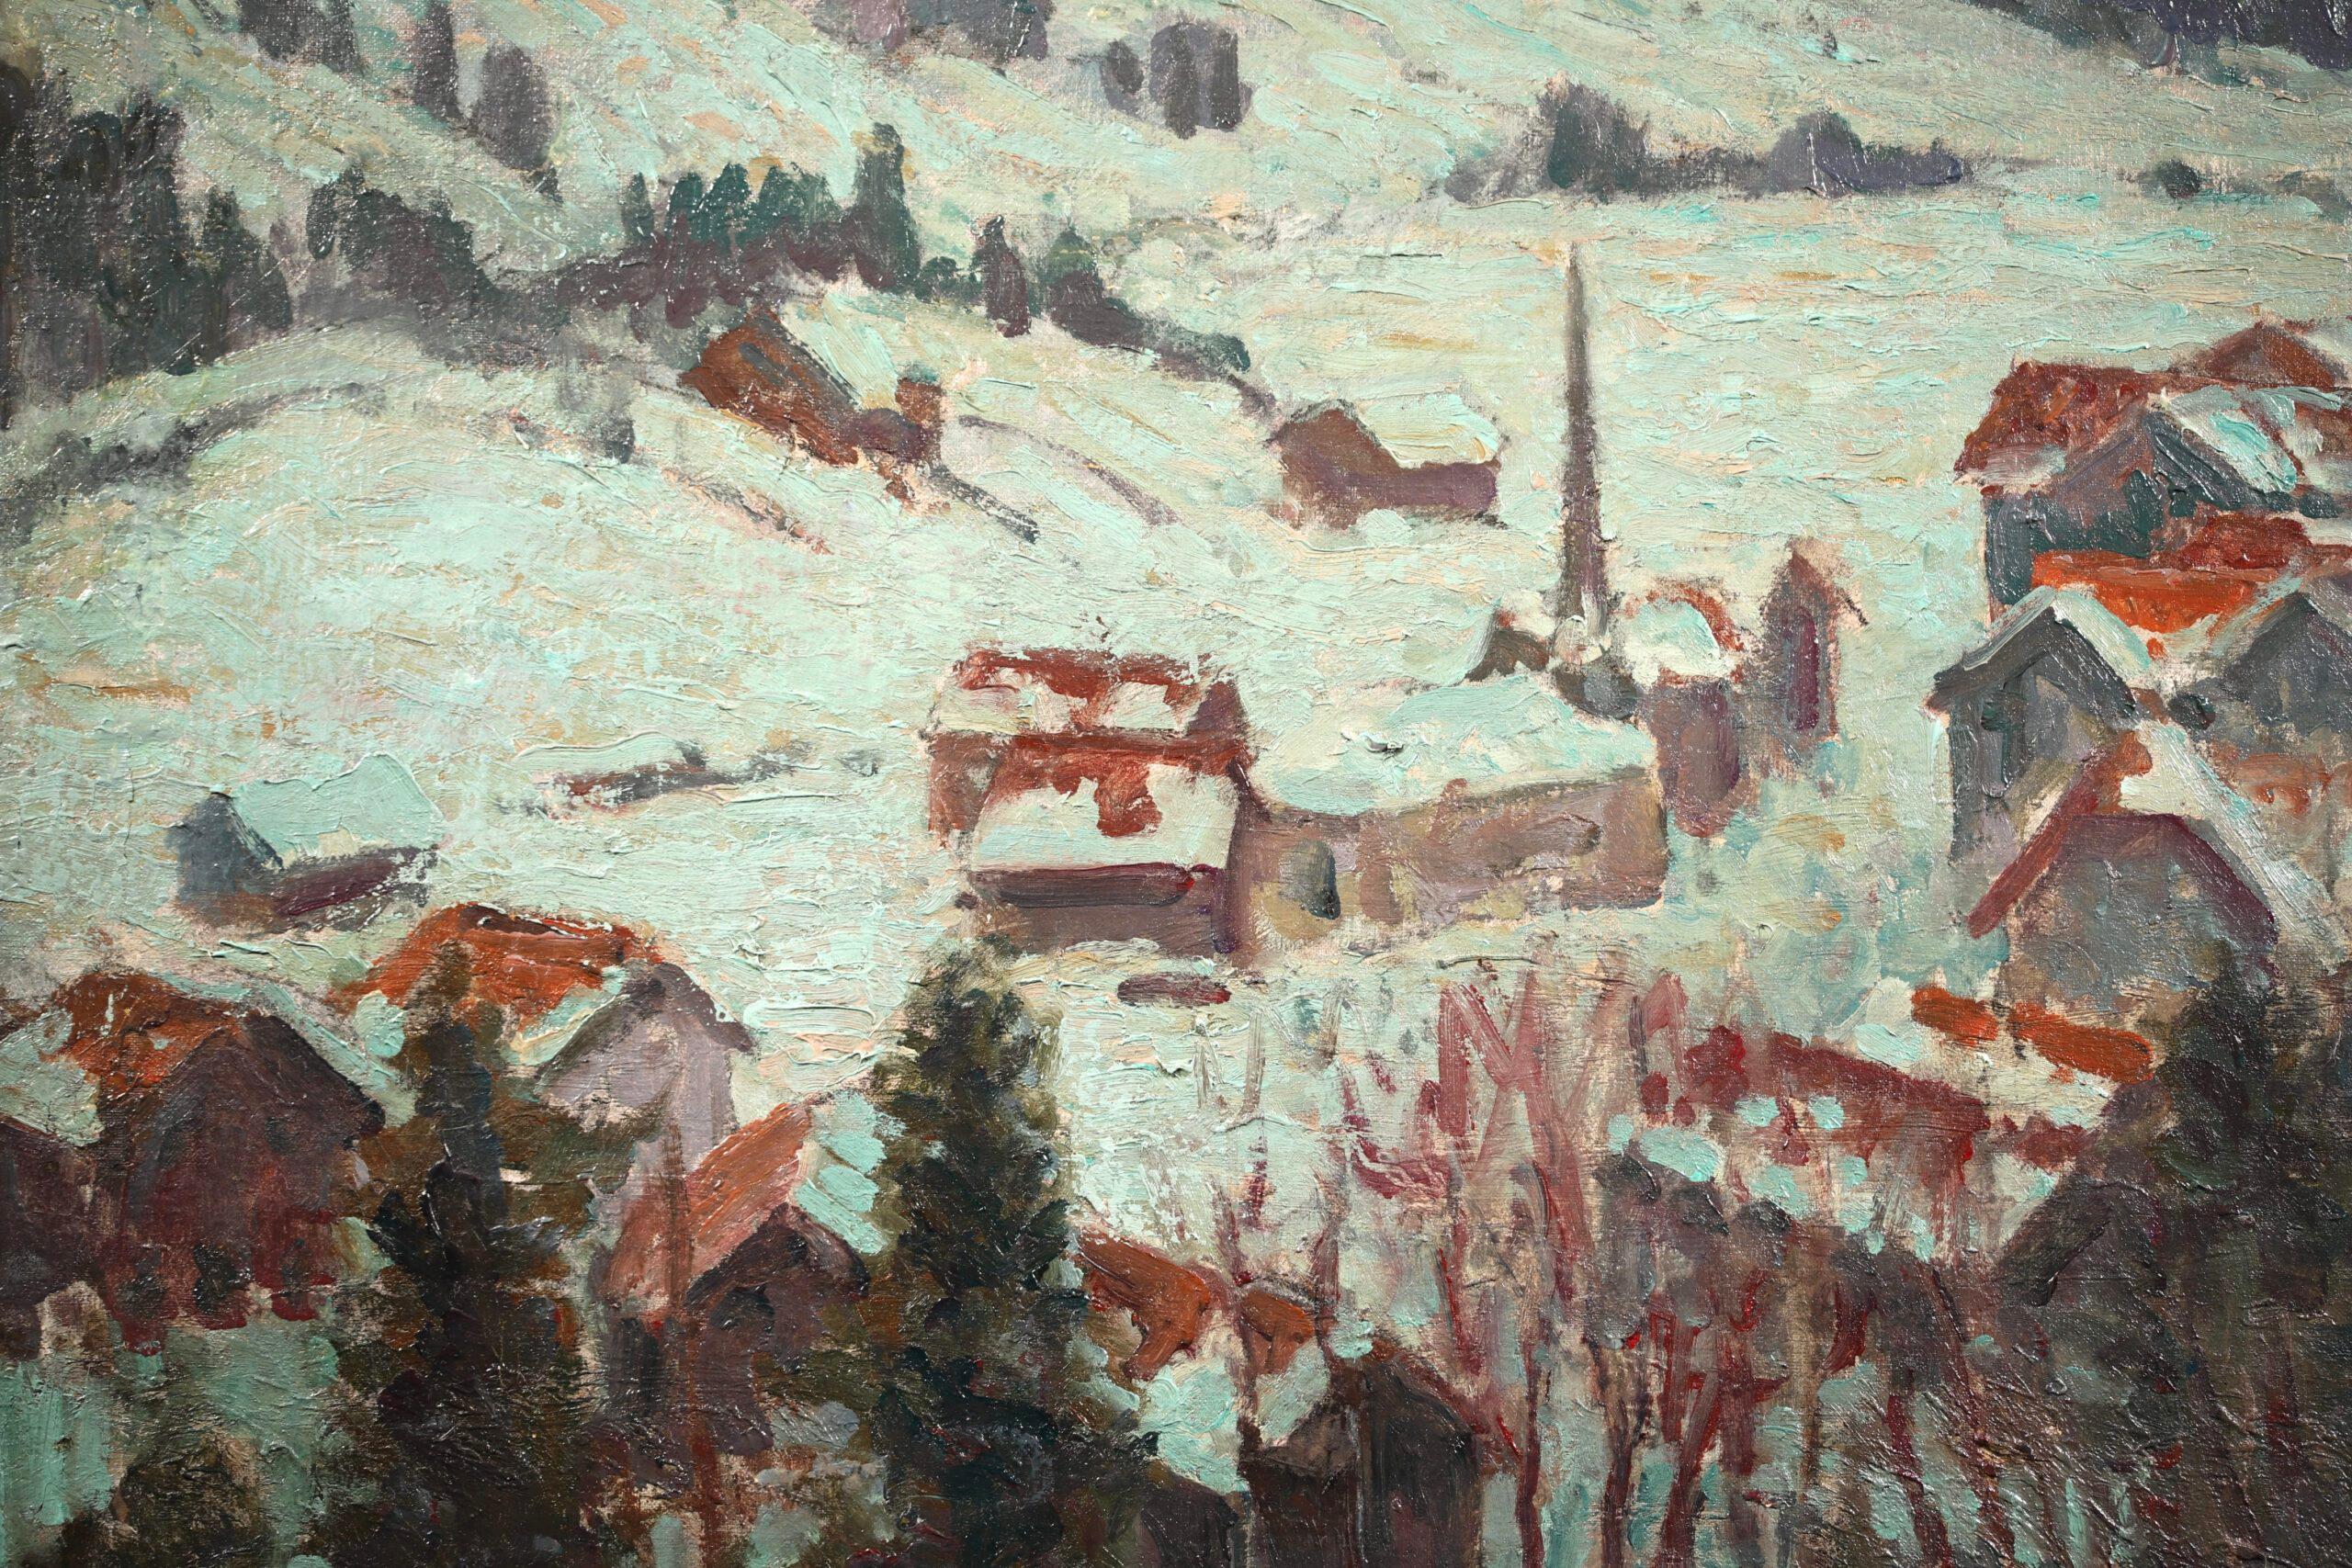 Winter Snow - Gstaad - Impressionist Landscape Oil by William Samuel Horton For Sale 9